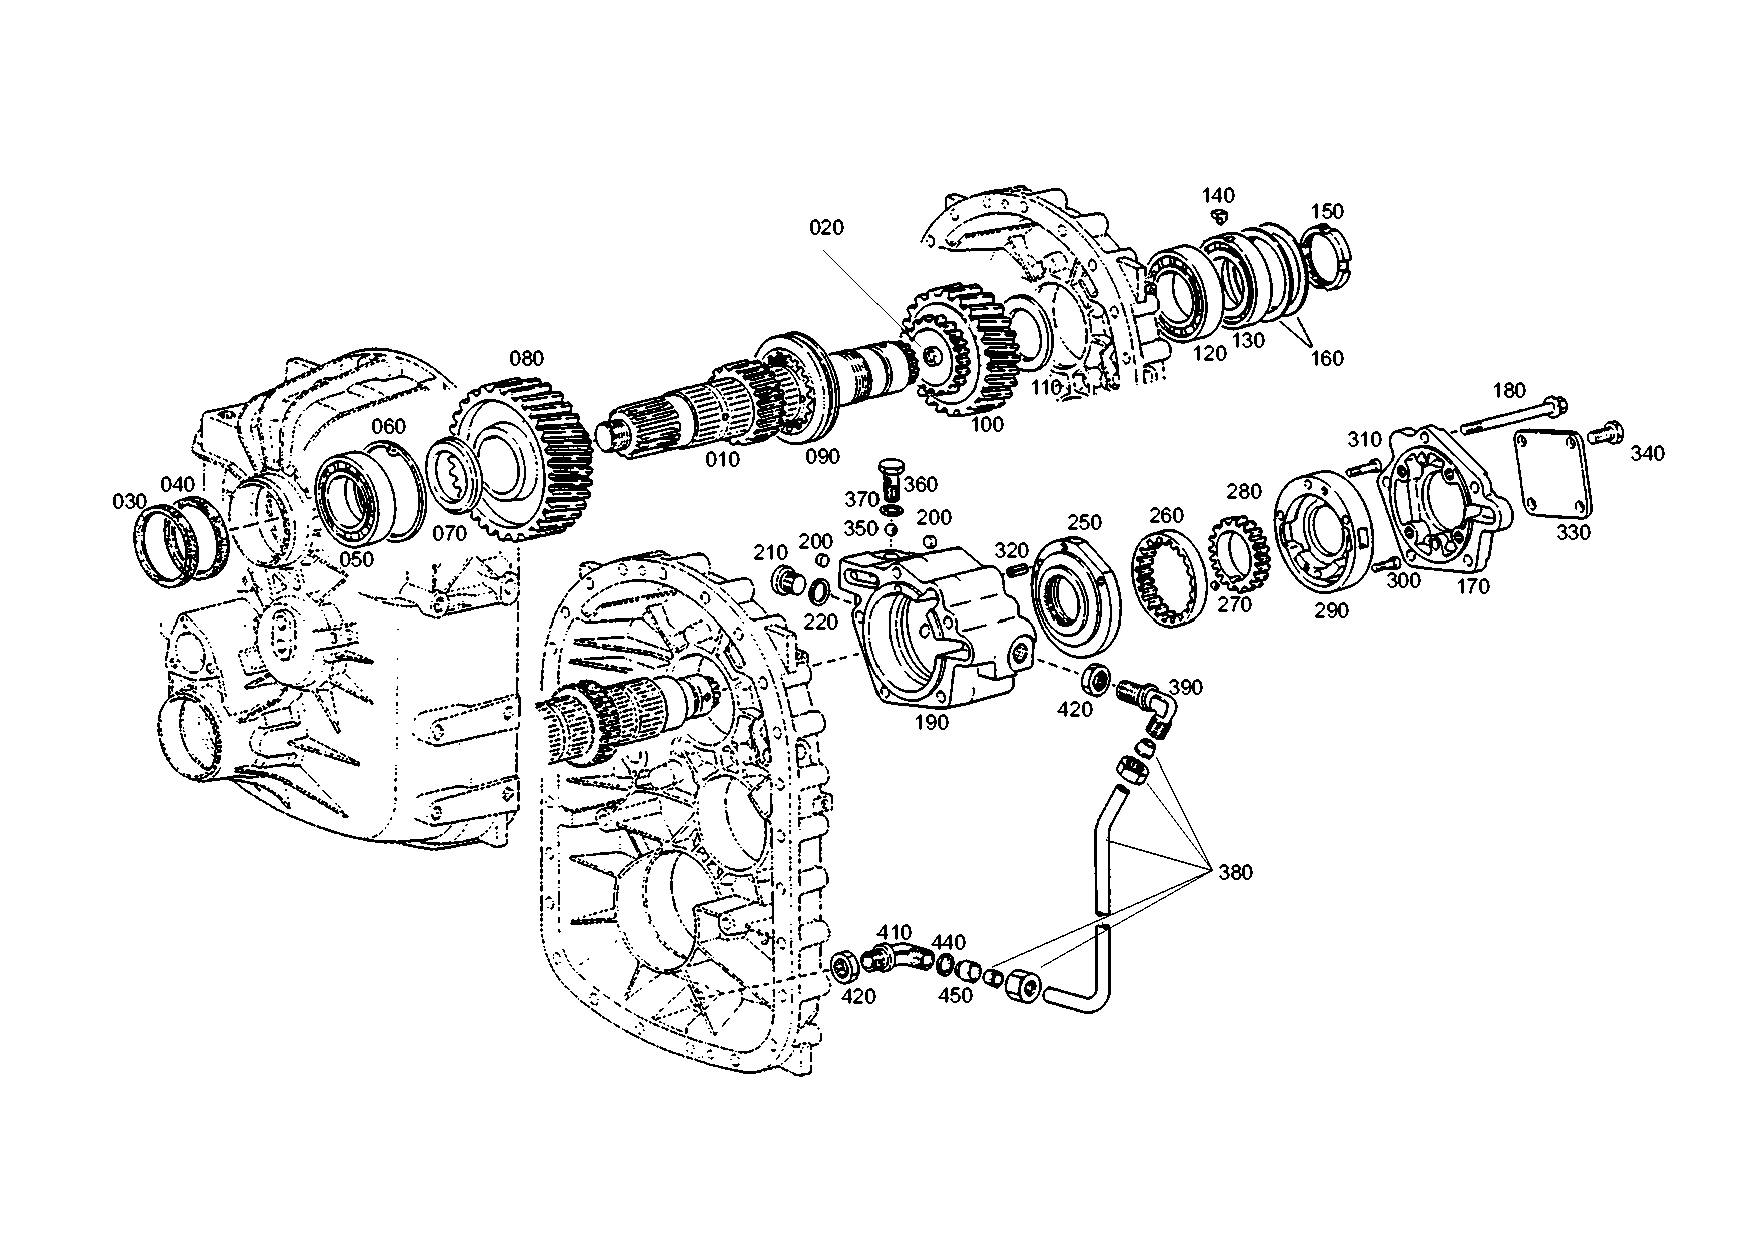 drawing for TITAN GMBH 1-99-916-002 - COVER (figure 3)